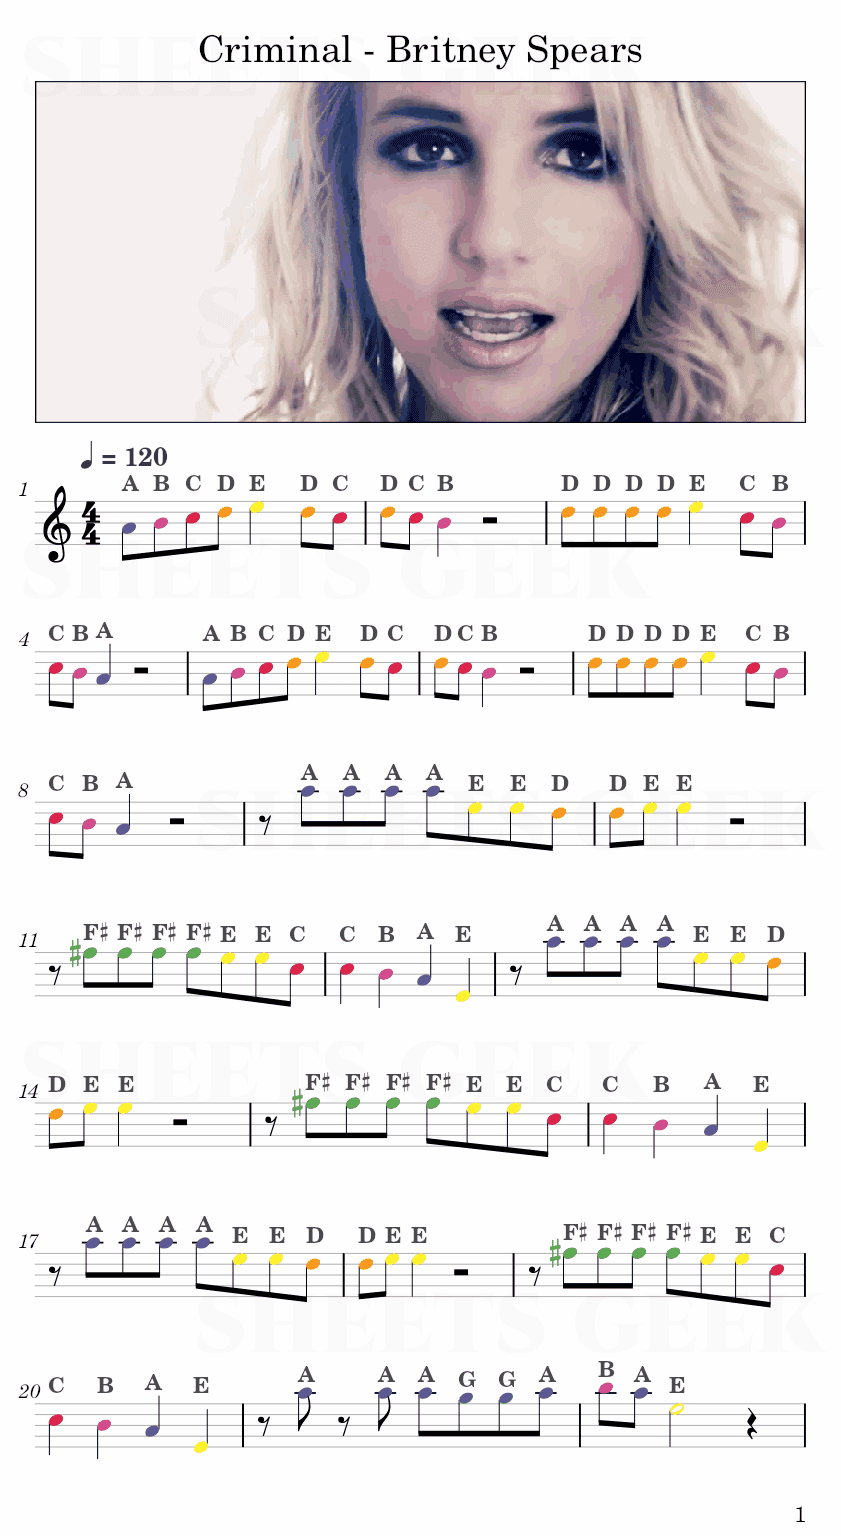 Criminal - Britney Spears Easy Sheet Music Free for piano, keyboard, flute, violin, sax, cello page 1